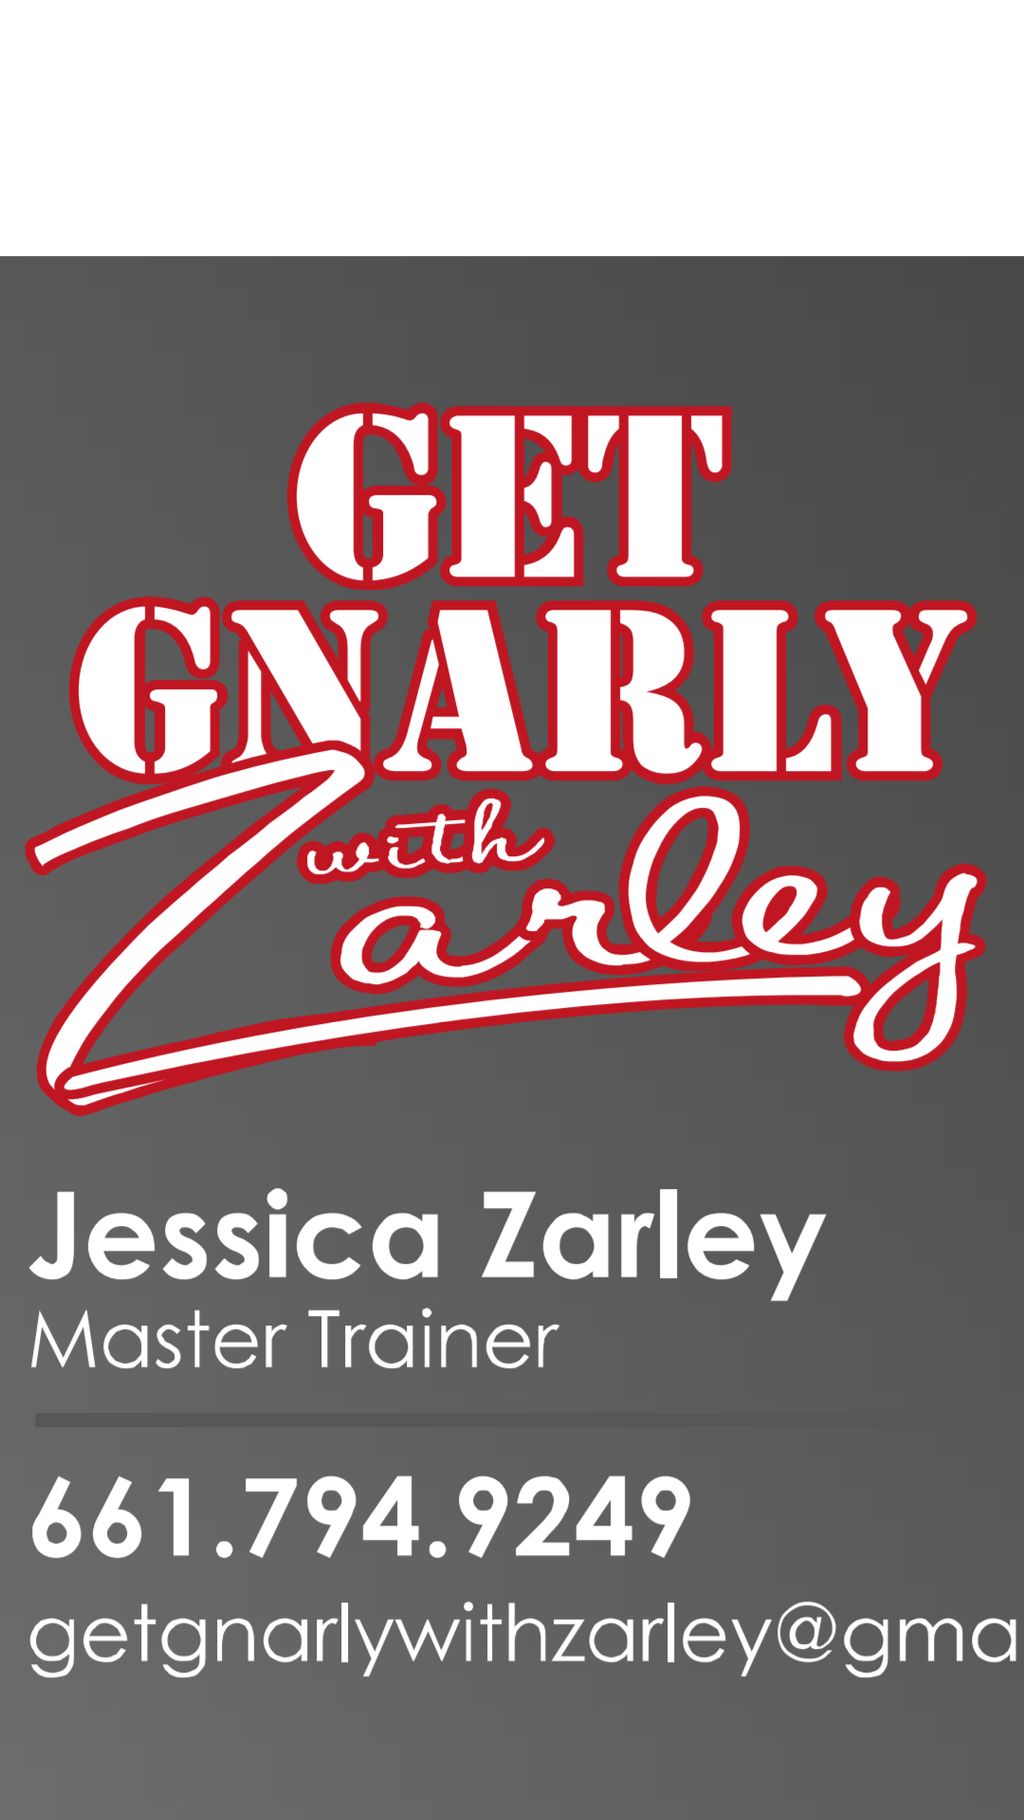 Get Gnarly with Zarley - Fitness